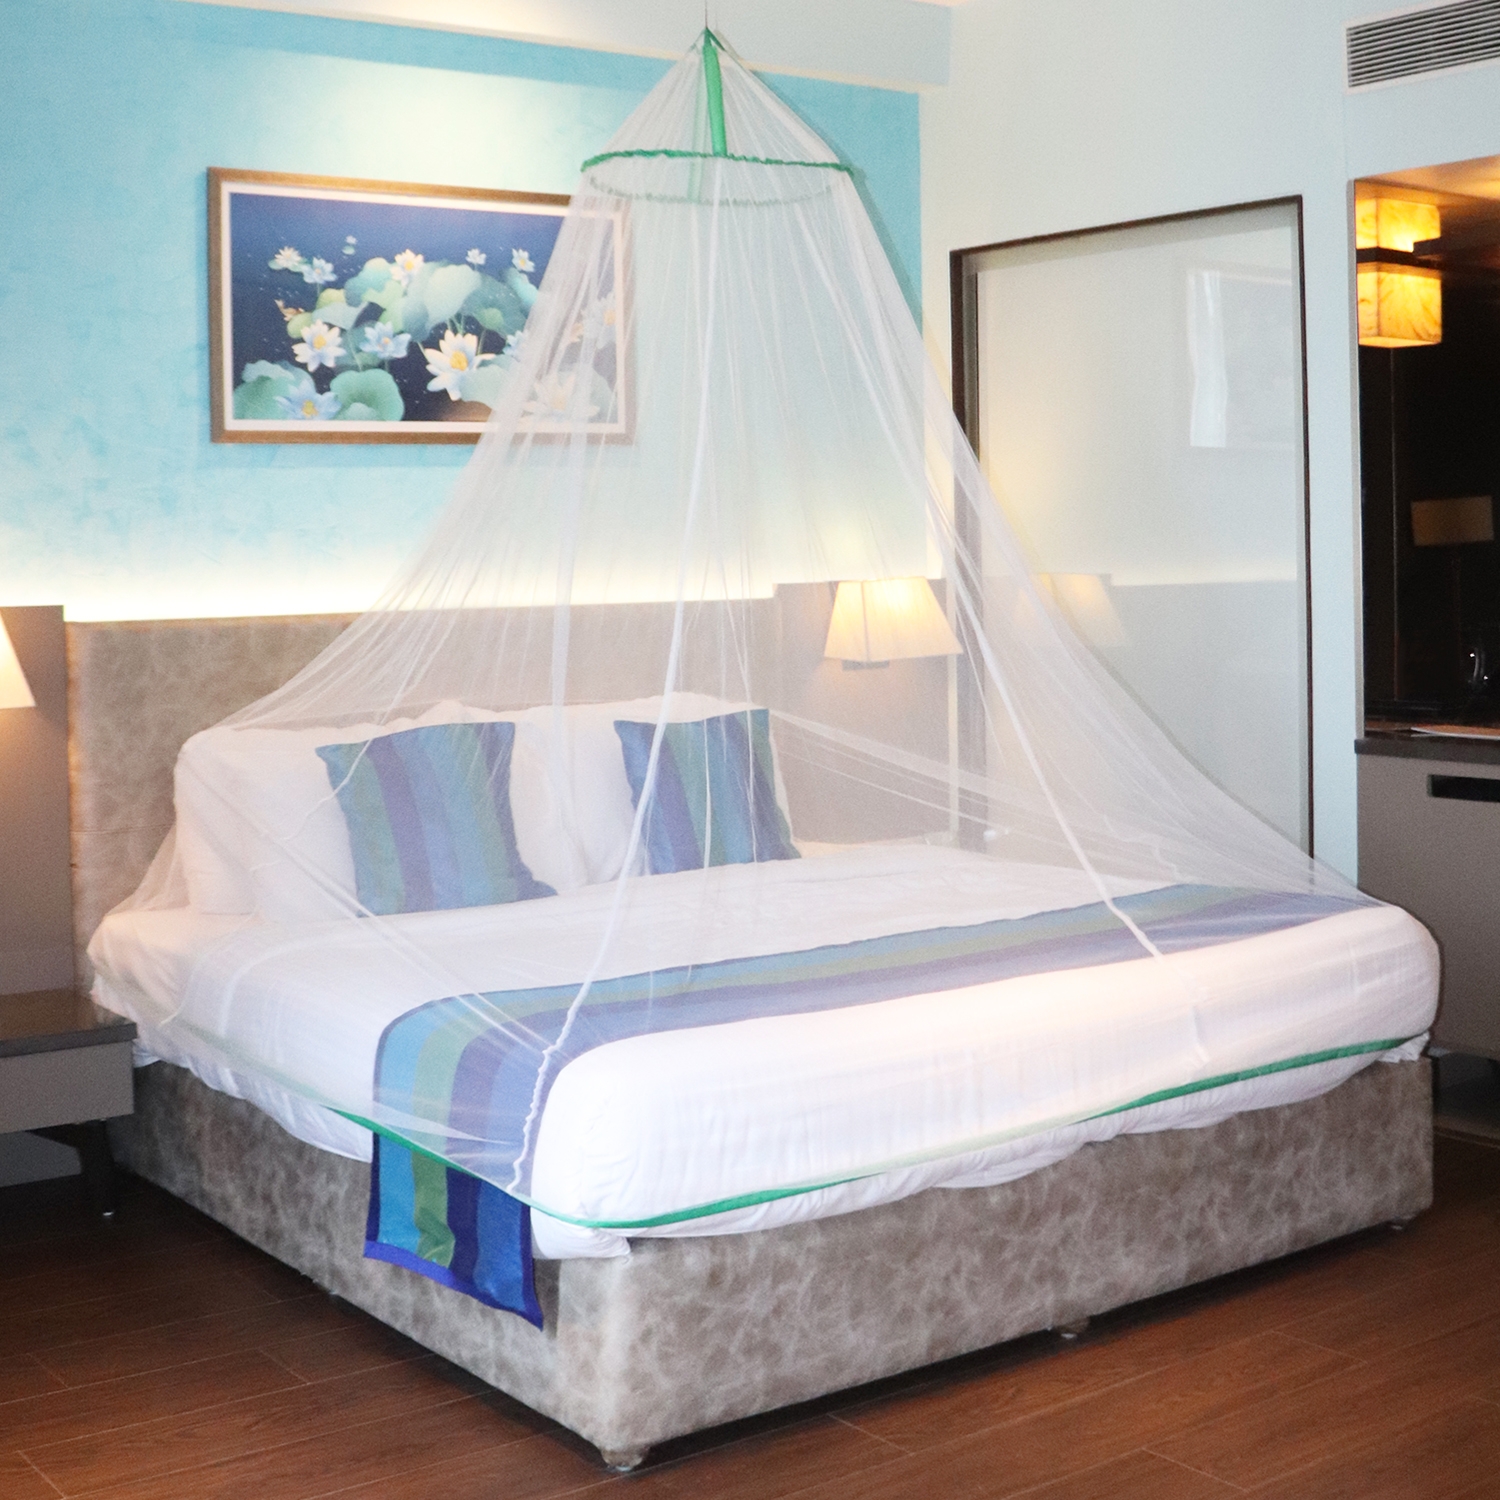 Mosquito Net for Double Bed, King-Size, Round Ceiling Hanging Foldable Polyester Net White And Green